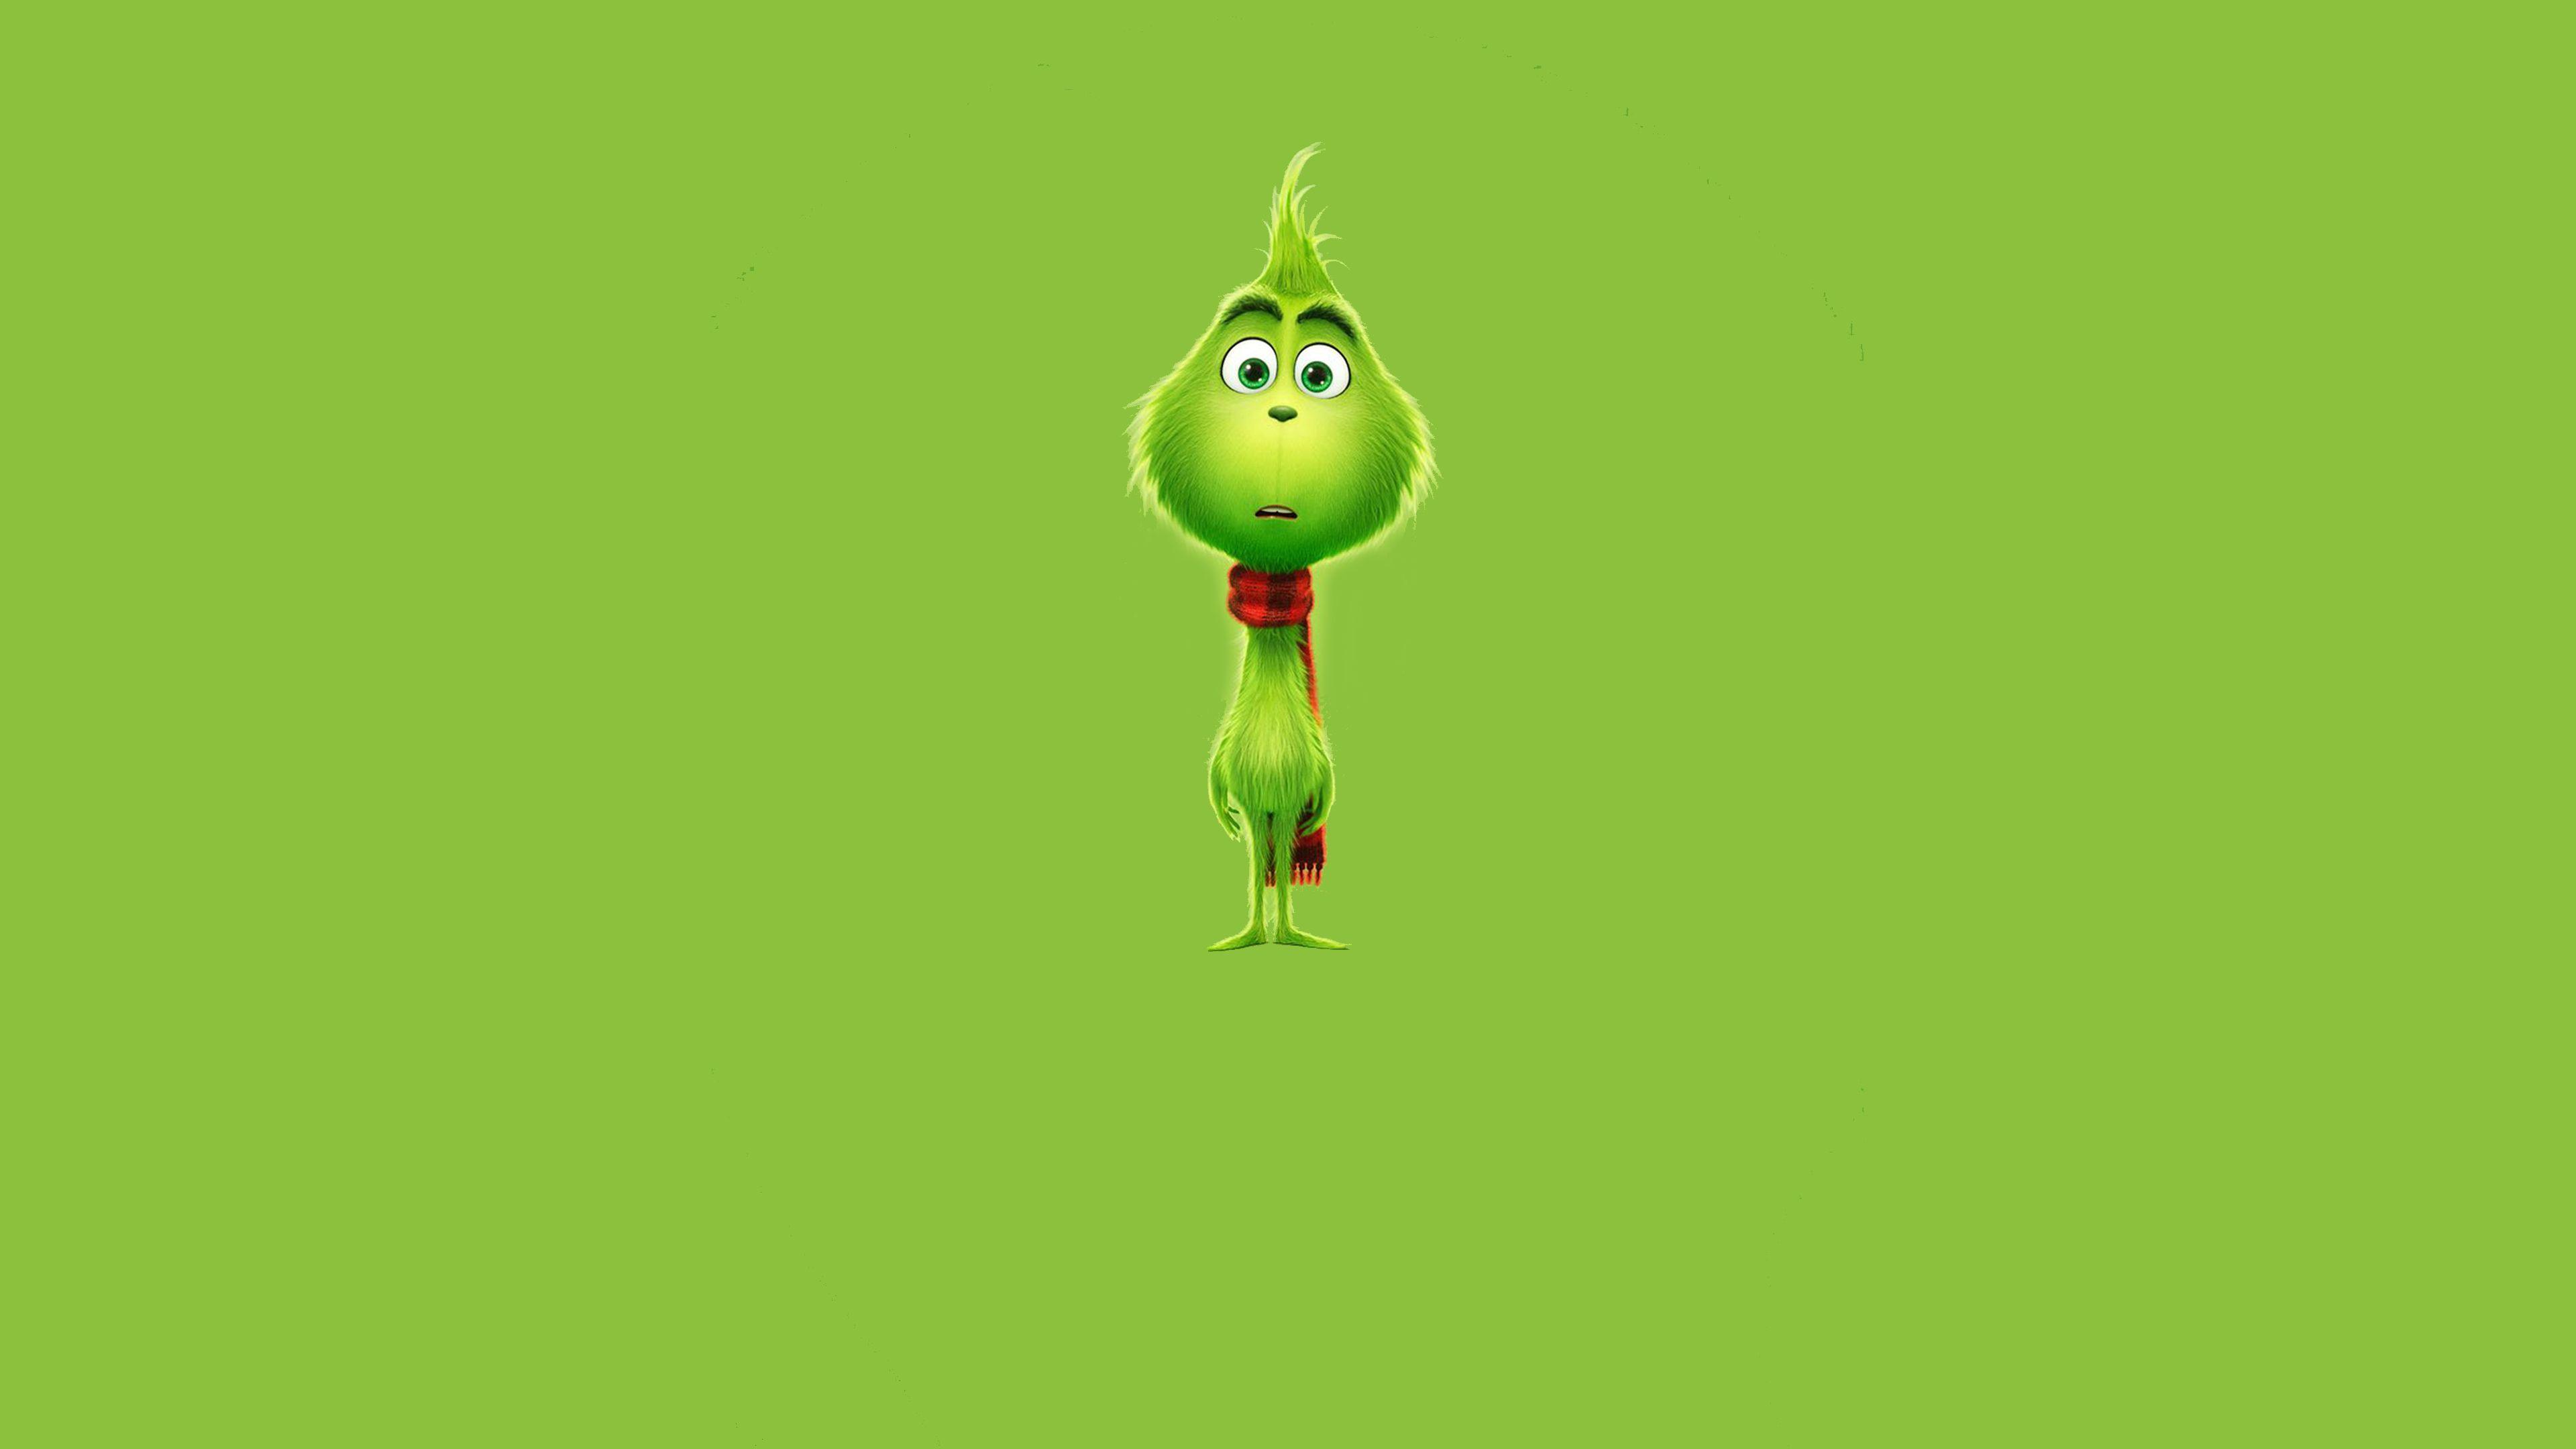 Mr Grinch Wallpapers - Wallpaper Cave